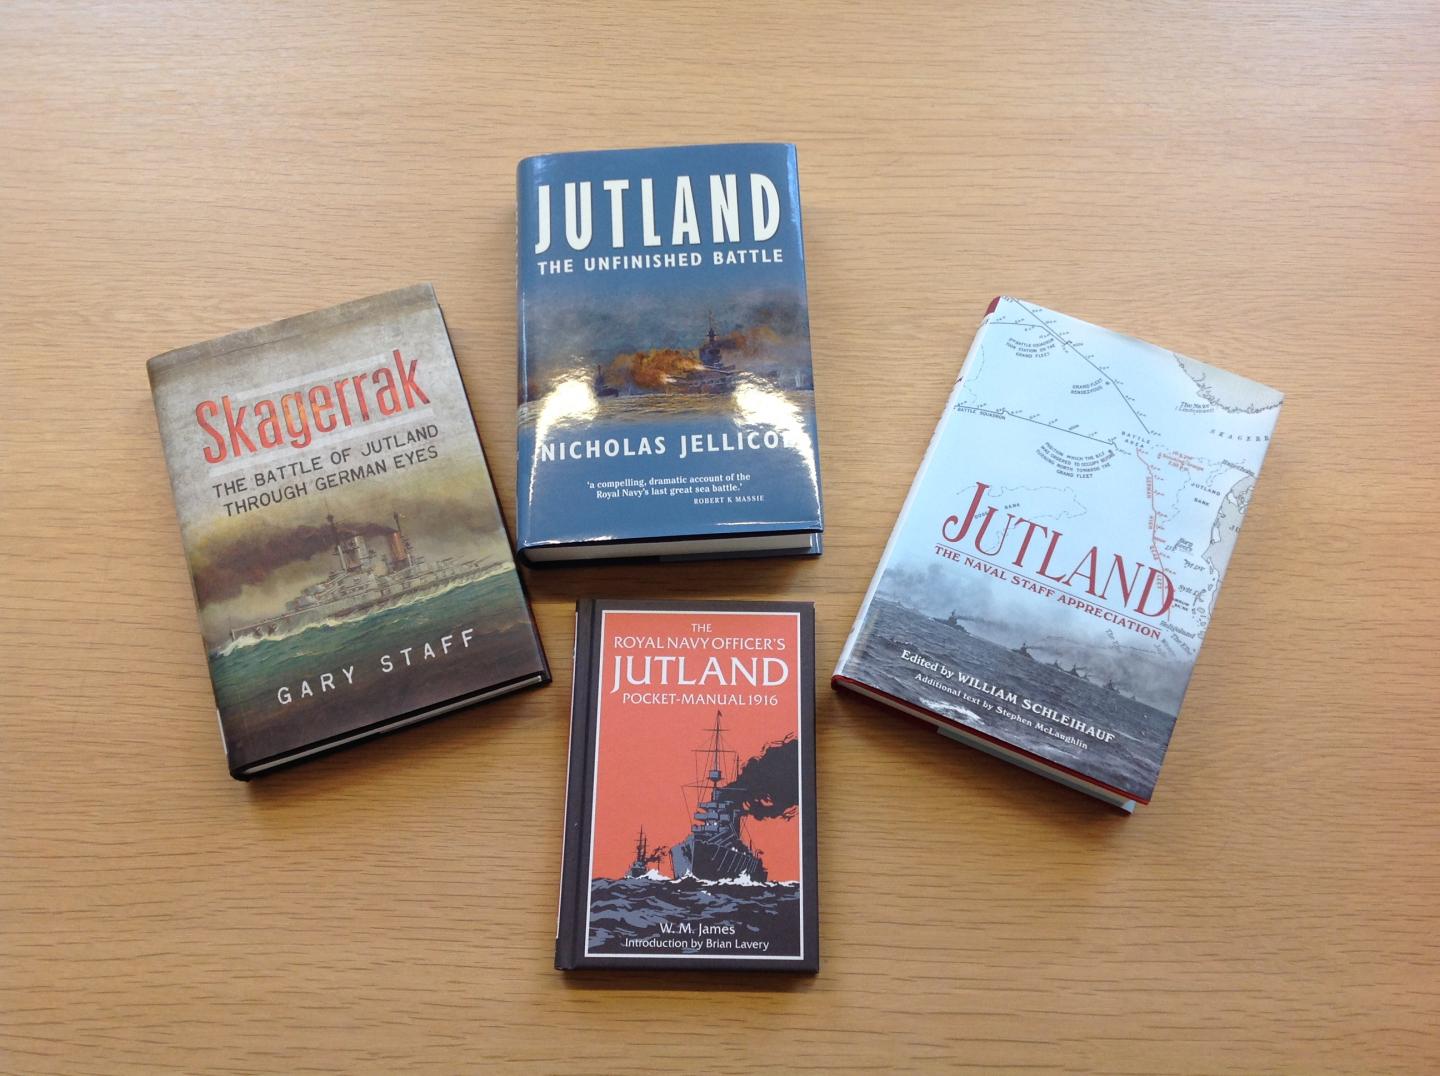 Jutland books at the Caird Library